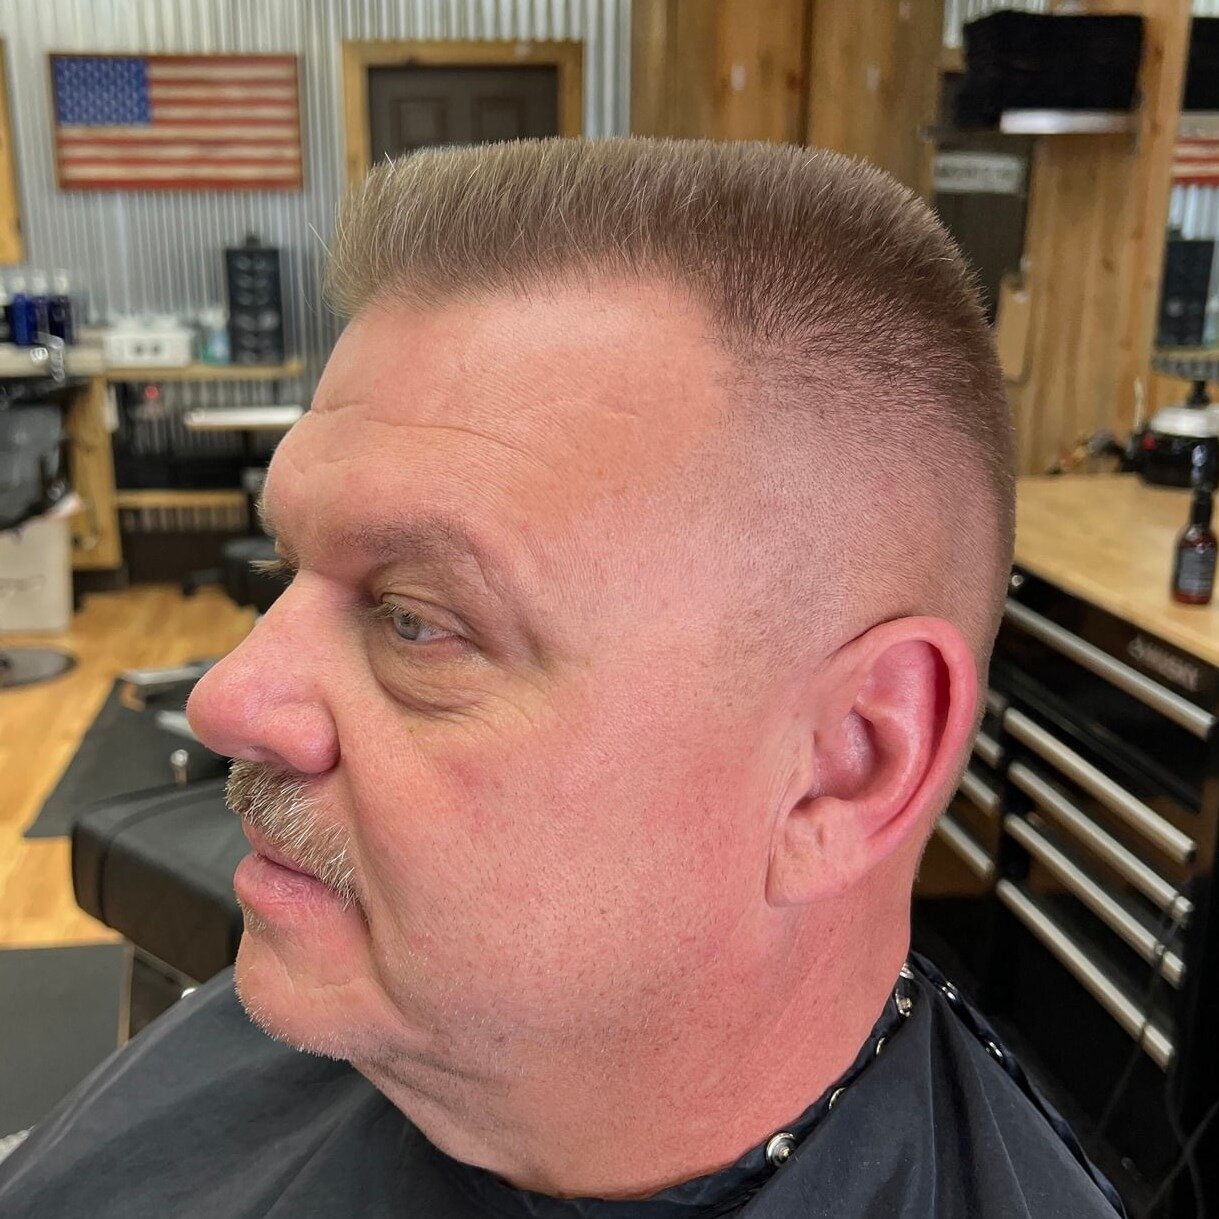 Flattops so sharp, they could cut through steel 🔪💪🏼 At our barbershop, we're not just experts, we're artists! Whether you want a classic look or something more modern, we've got you covered 👌🏼 Don't miss a beat, hit that like button and stay up-